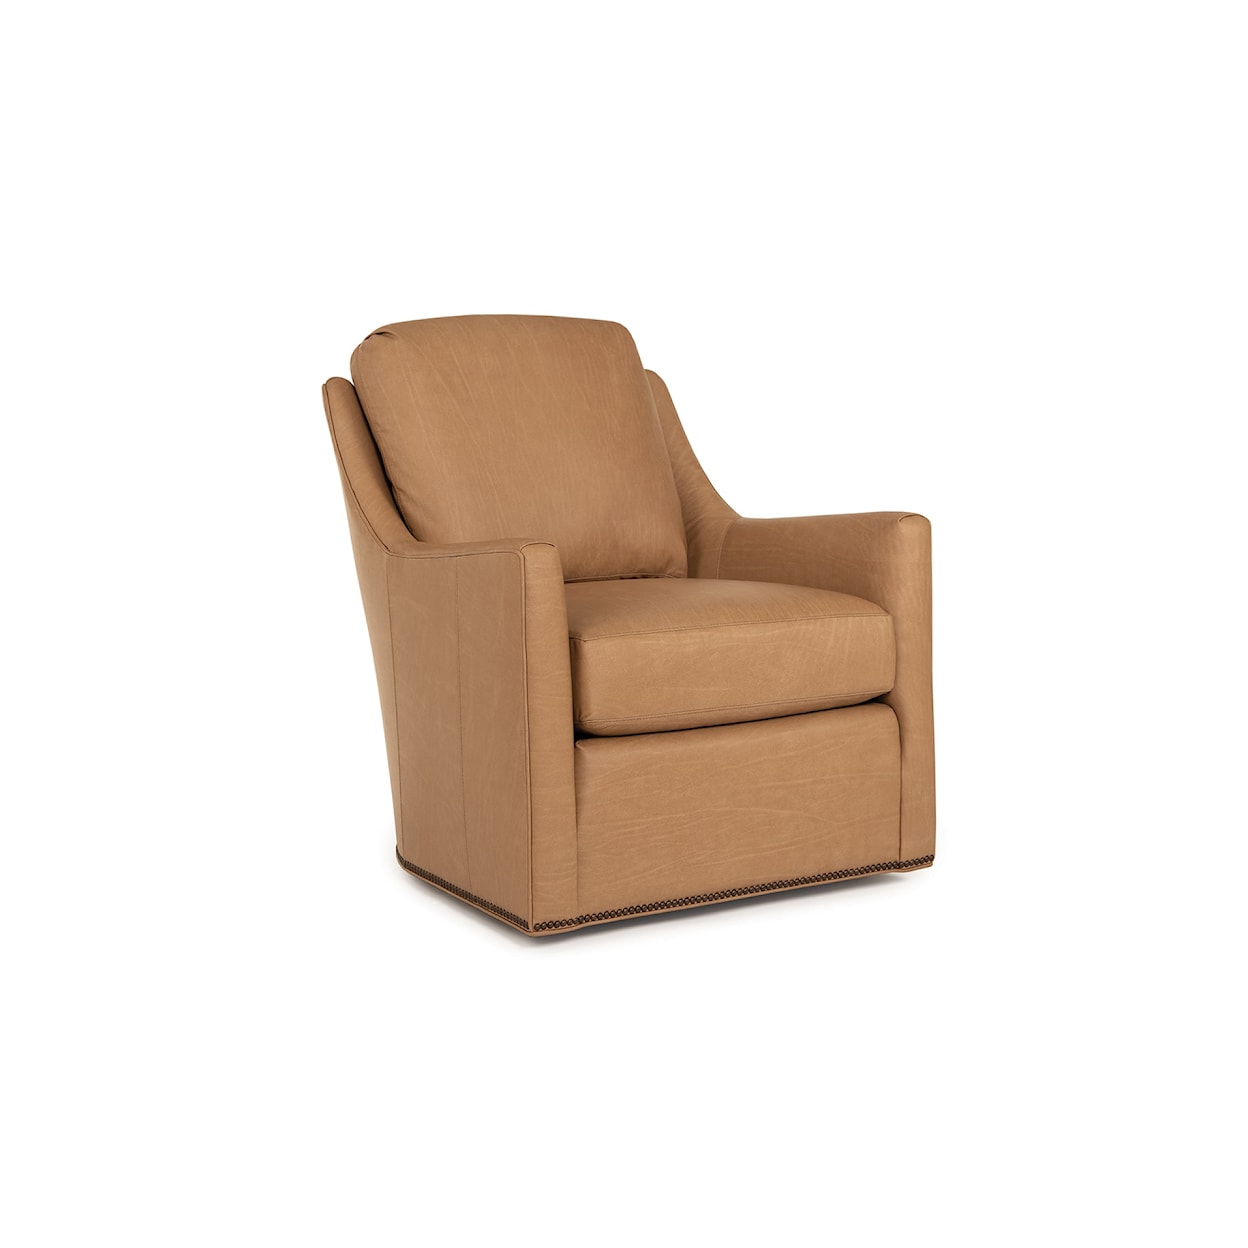 Smith Brothers 560 Swivel Chair